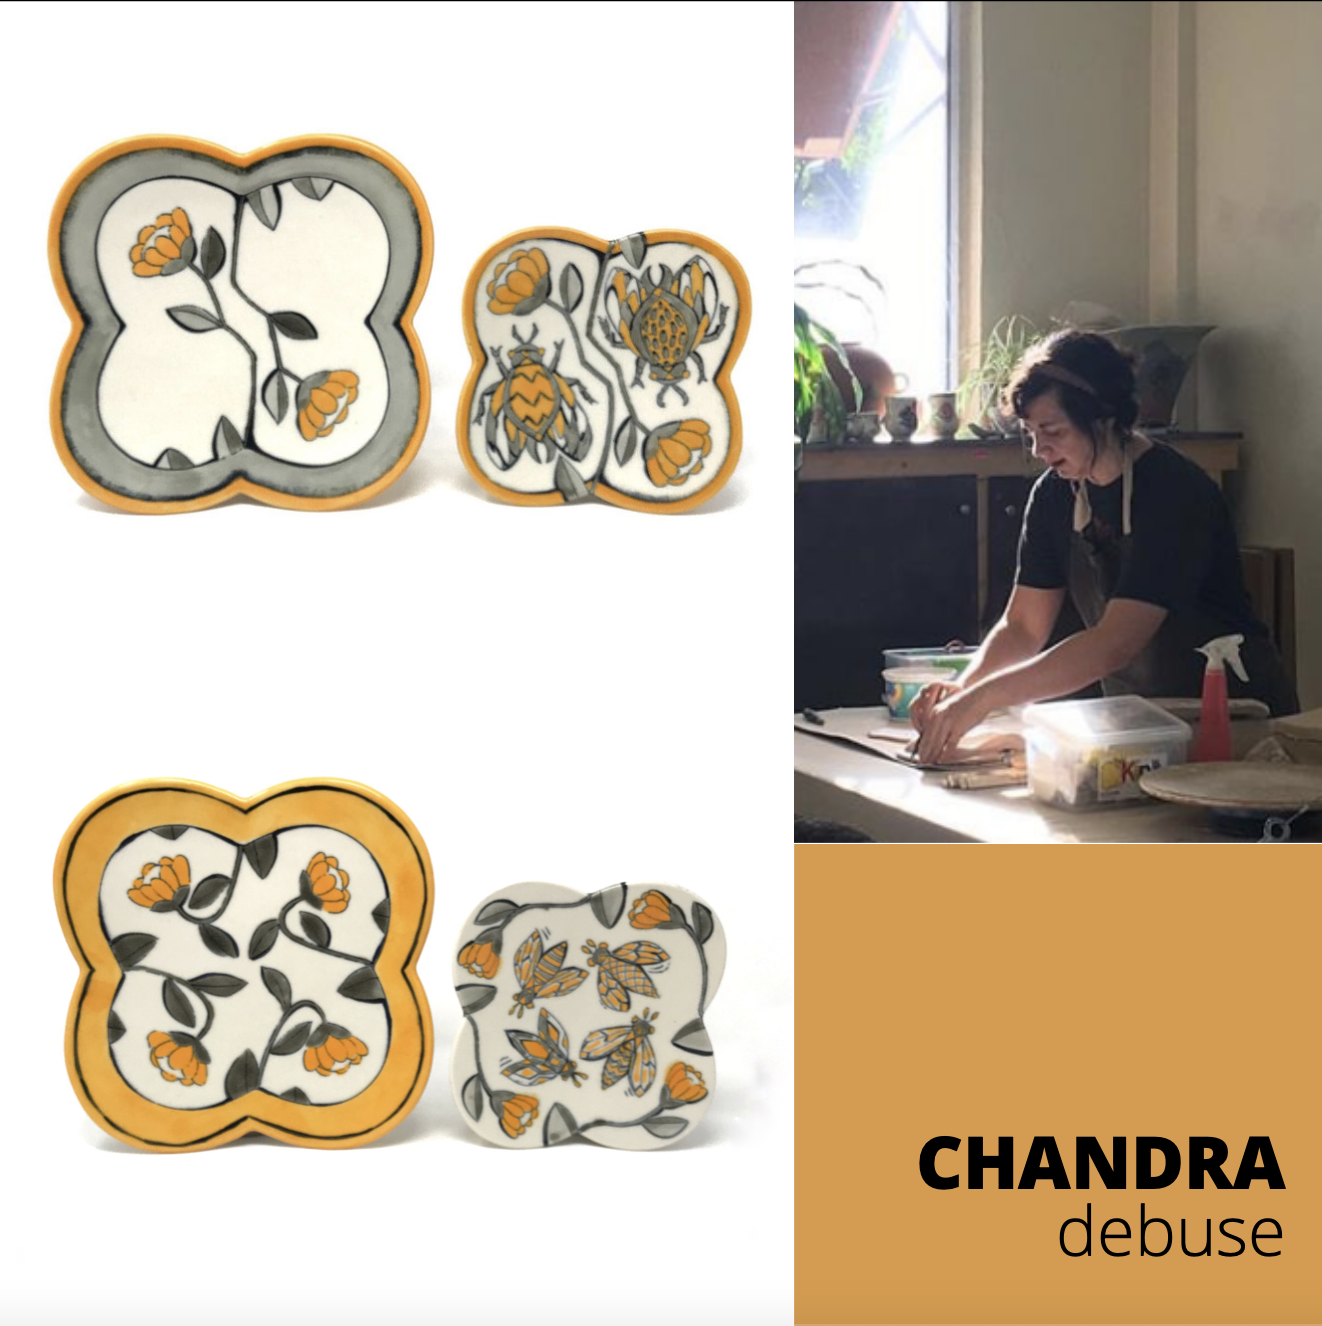 THE DECORATED PLATE WITH CHANDRA DEBUSE